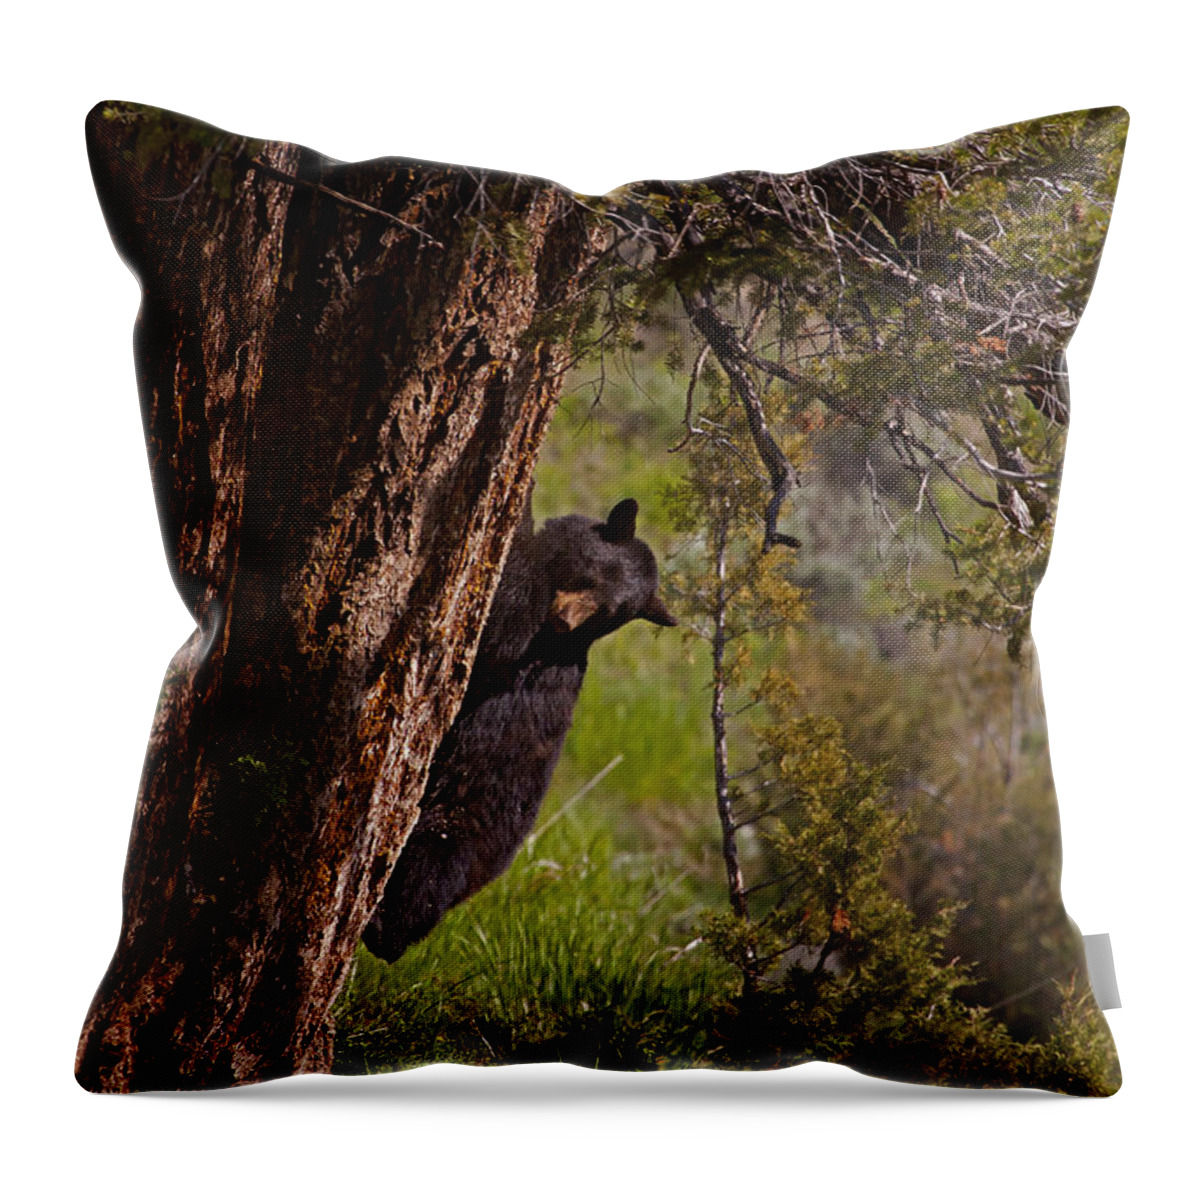 Bear Throw Pillow featuring the photograph Black Bear In A Tree by J L Woody Wooden